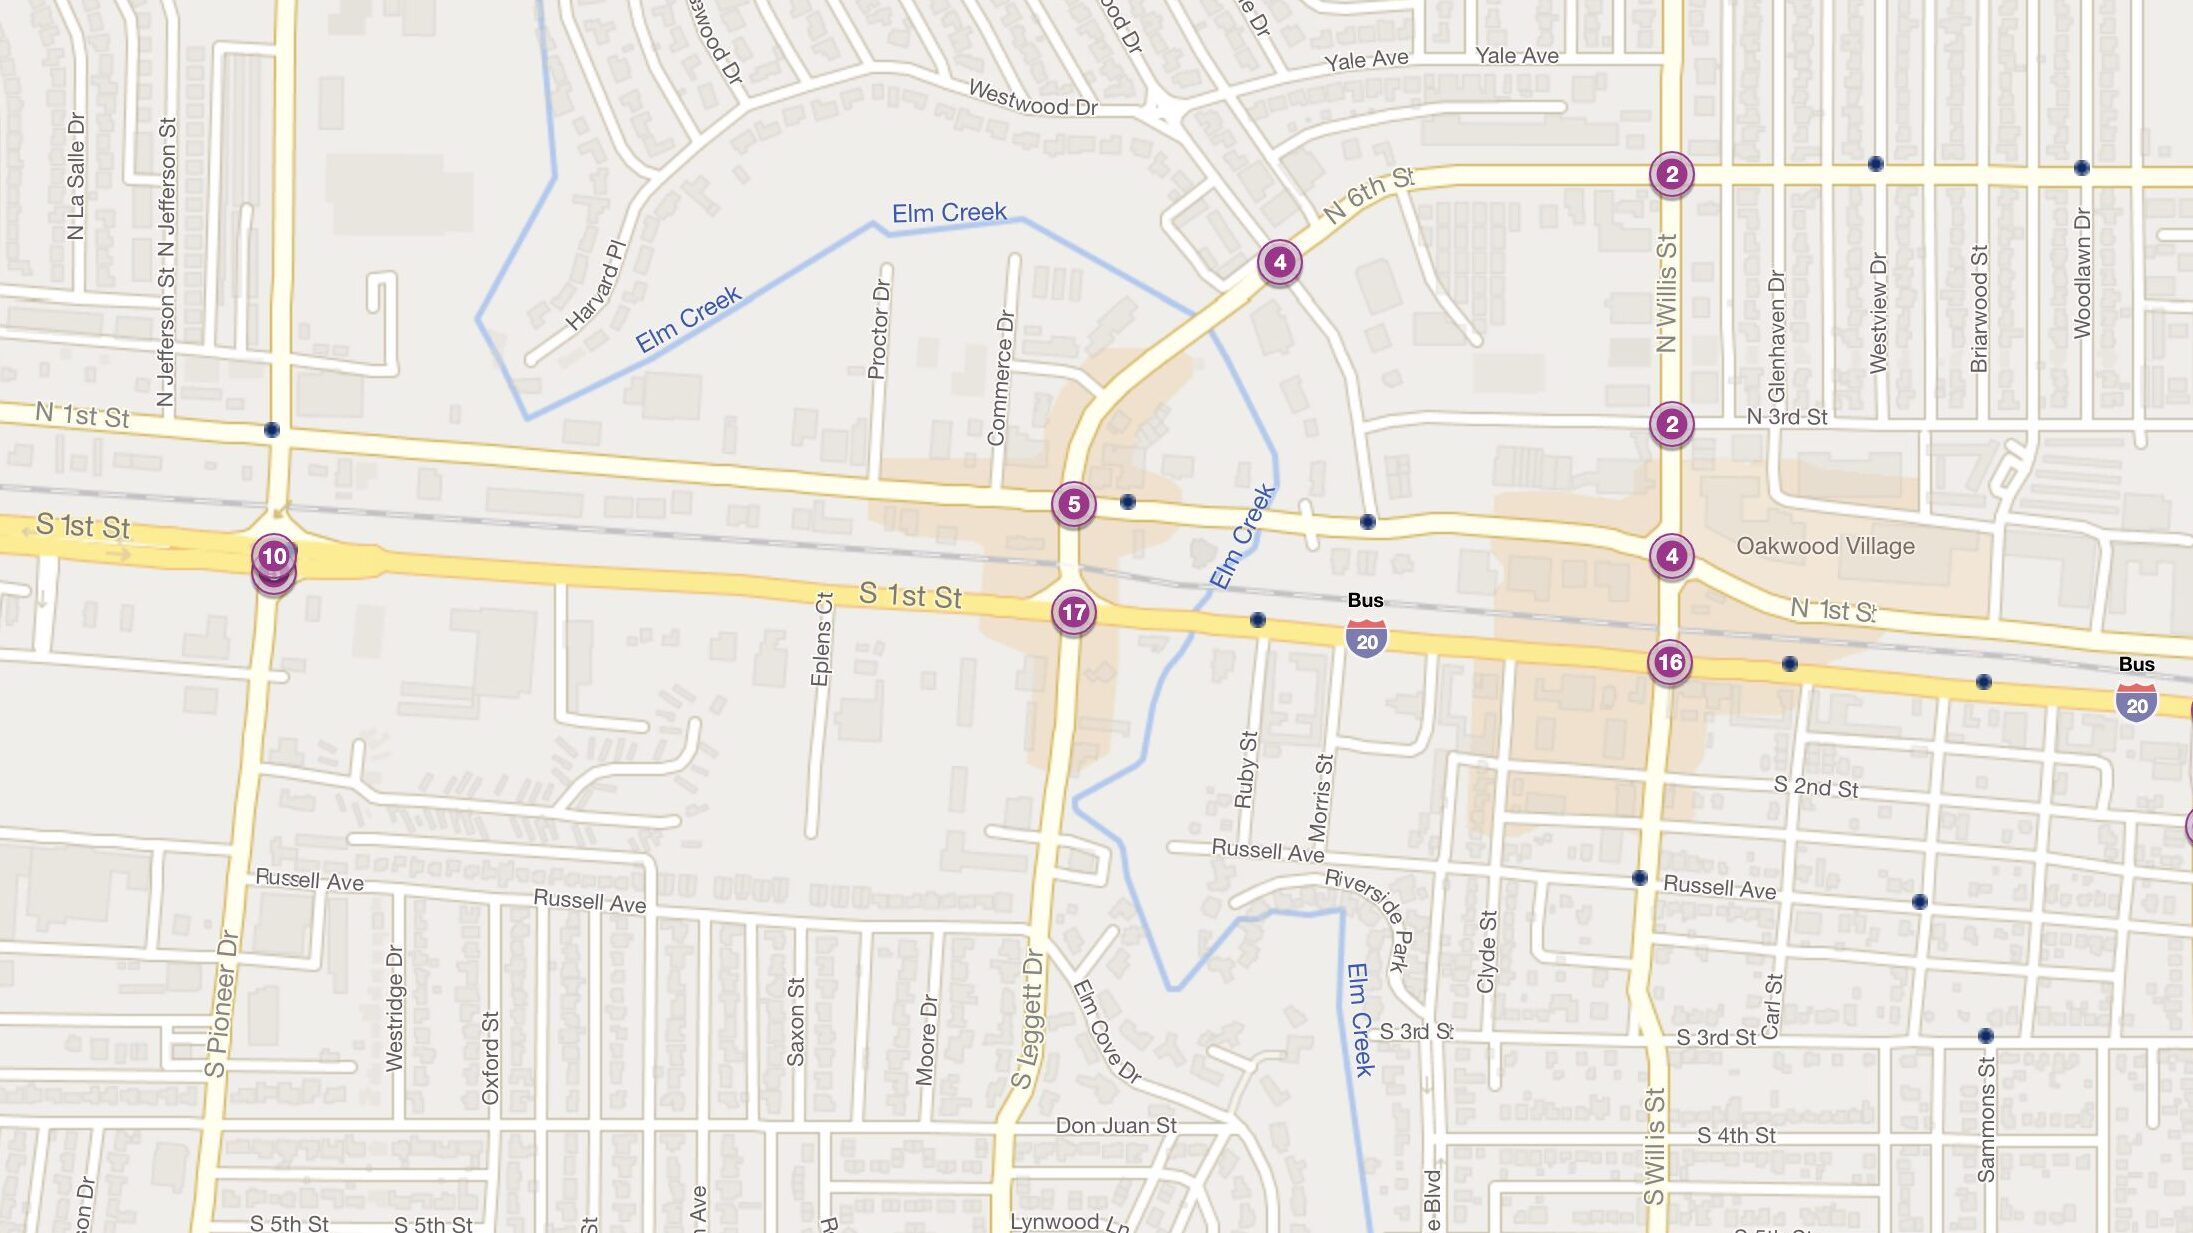 Cluster Map of 2023 Car Accidents at S. 1st St. & 6th St. (TXDOT)